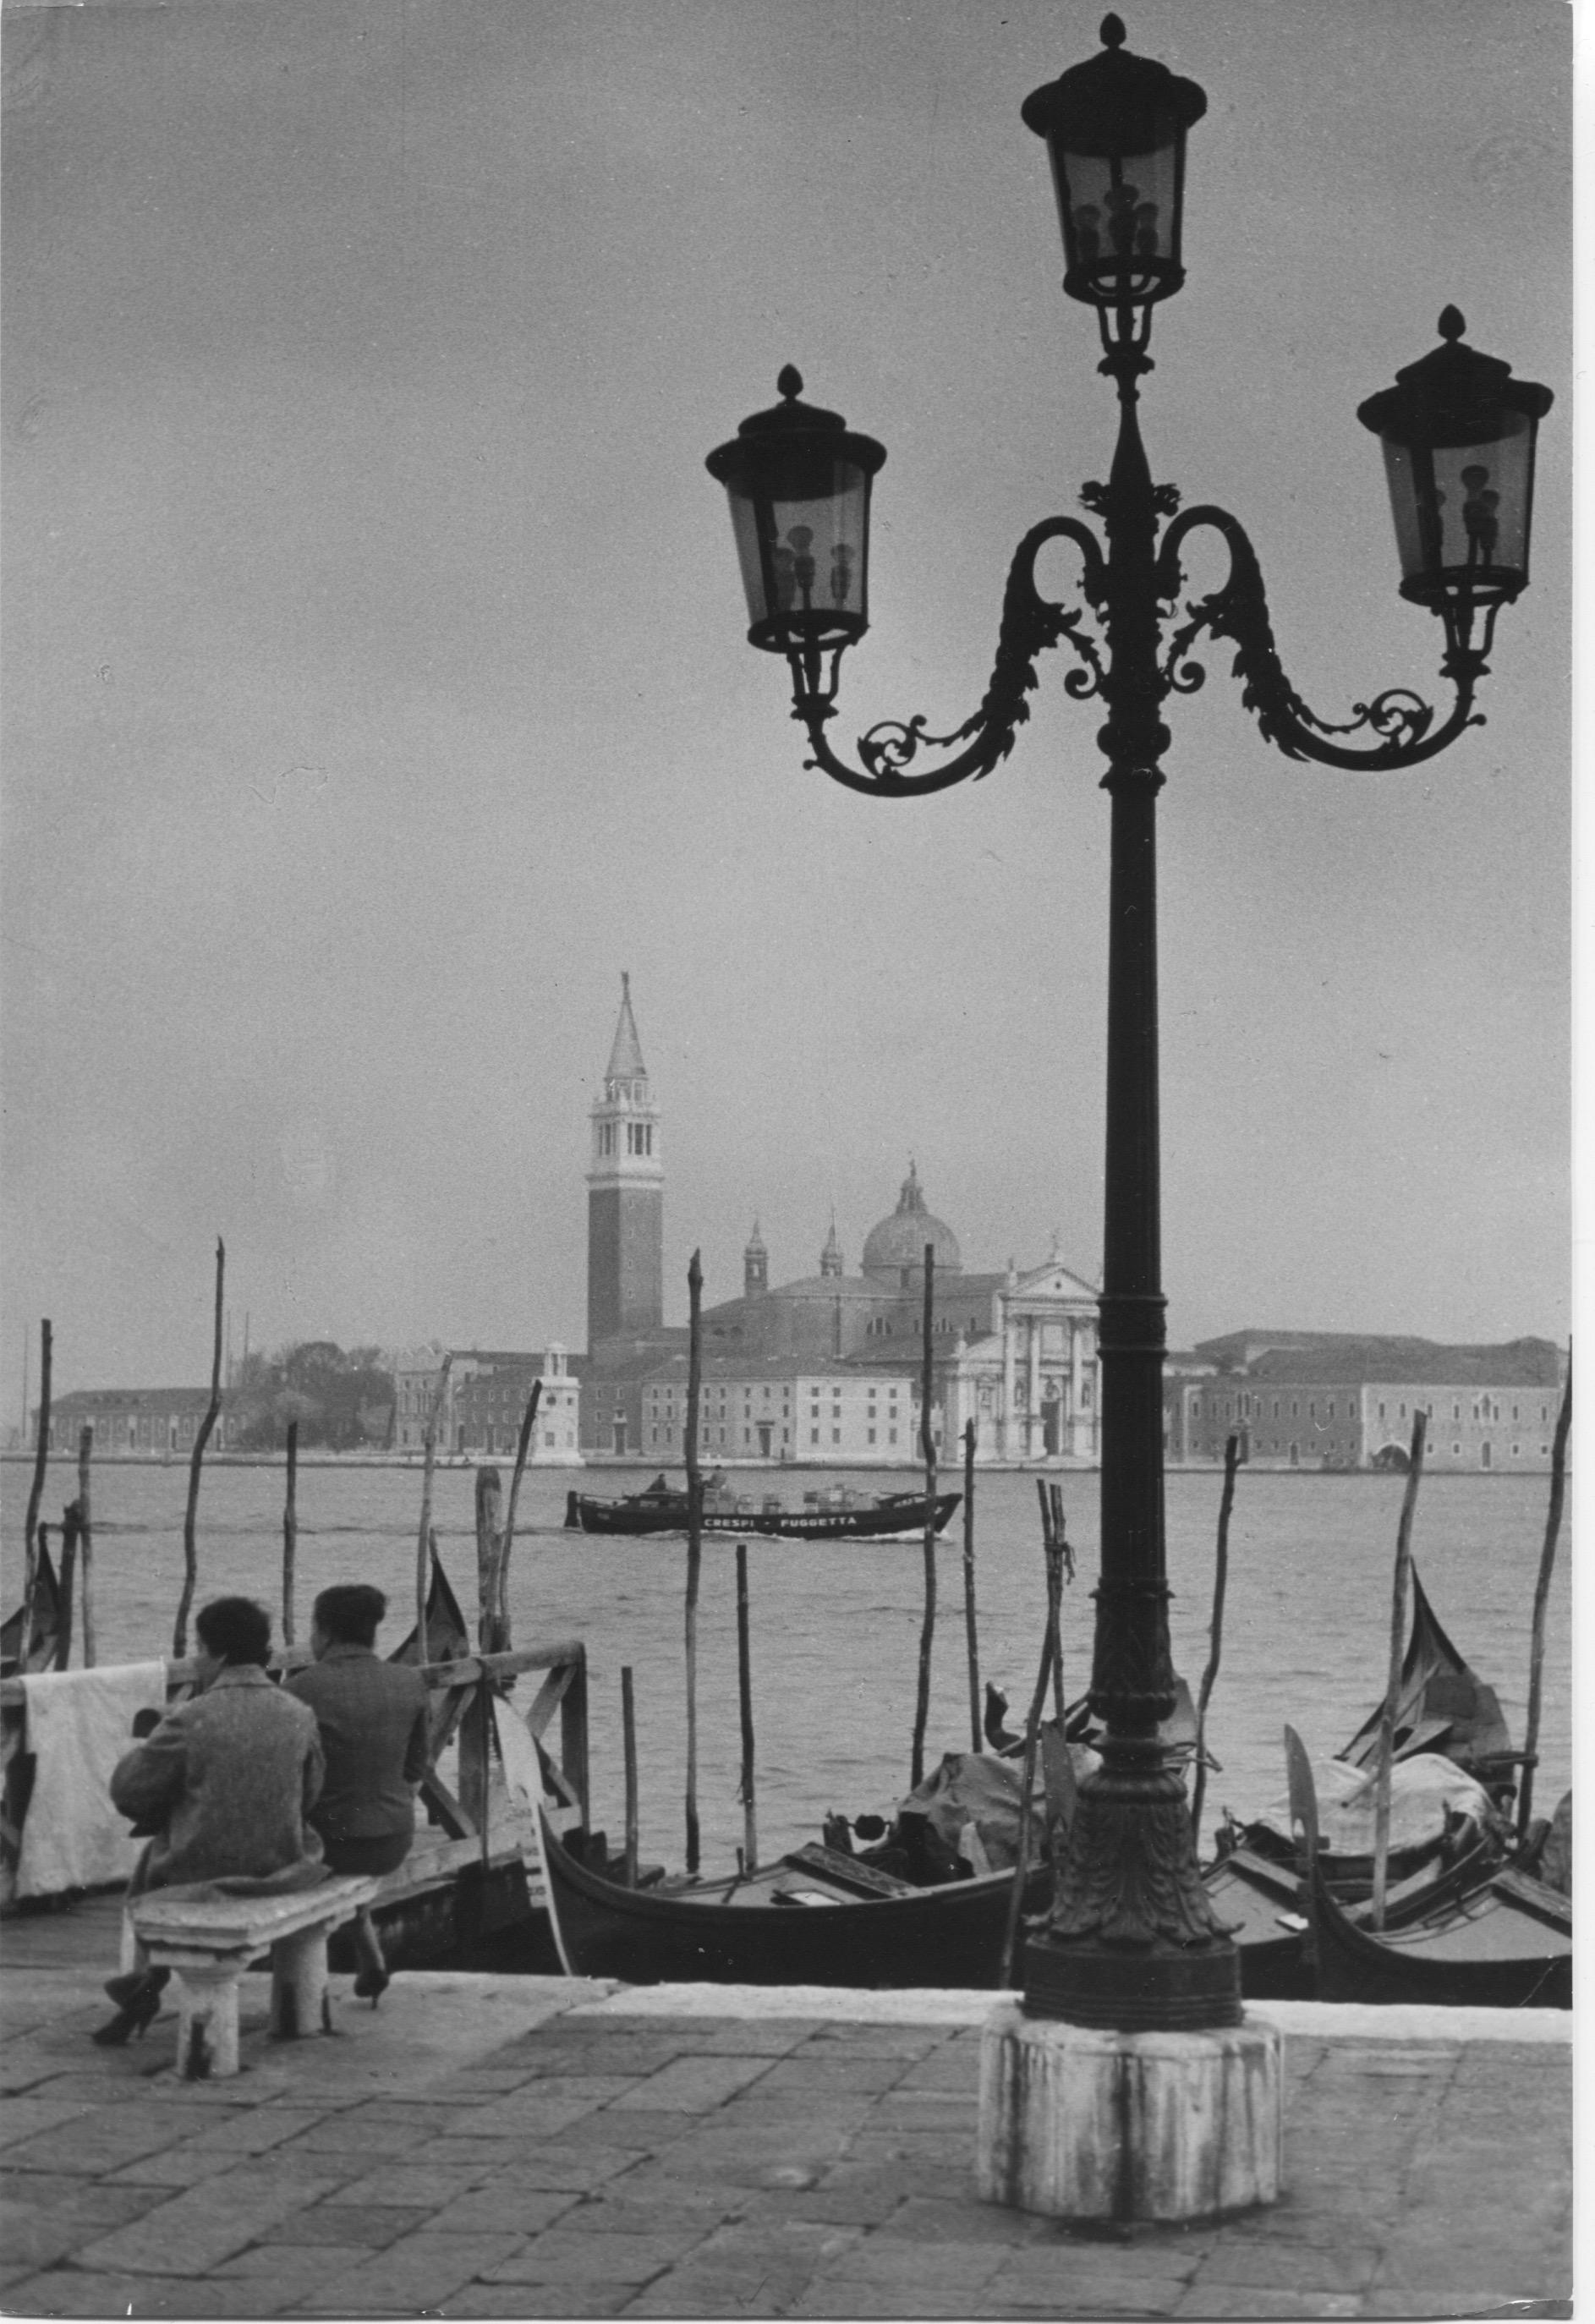 Erich Andres Black and White Photograph - Andres: Venice - Gondolas with people, Italy, 1955